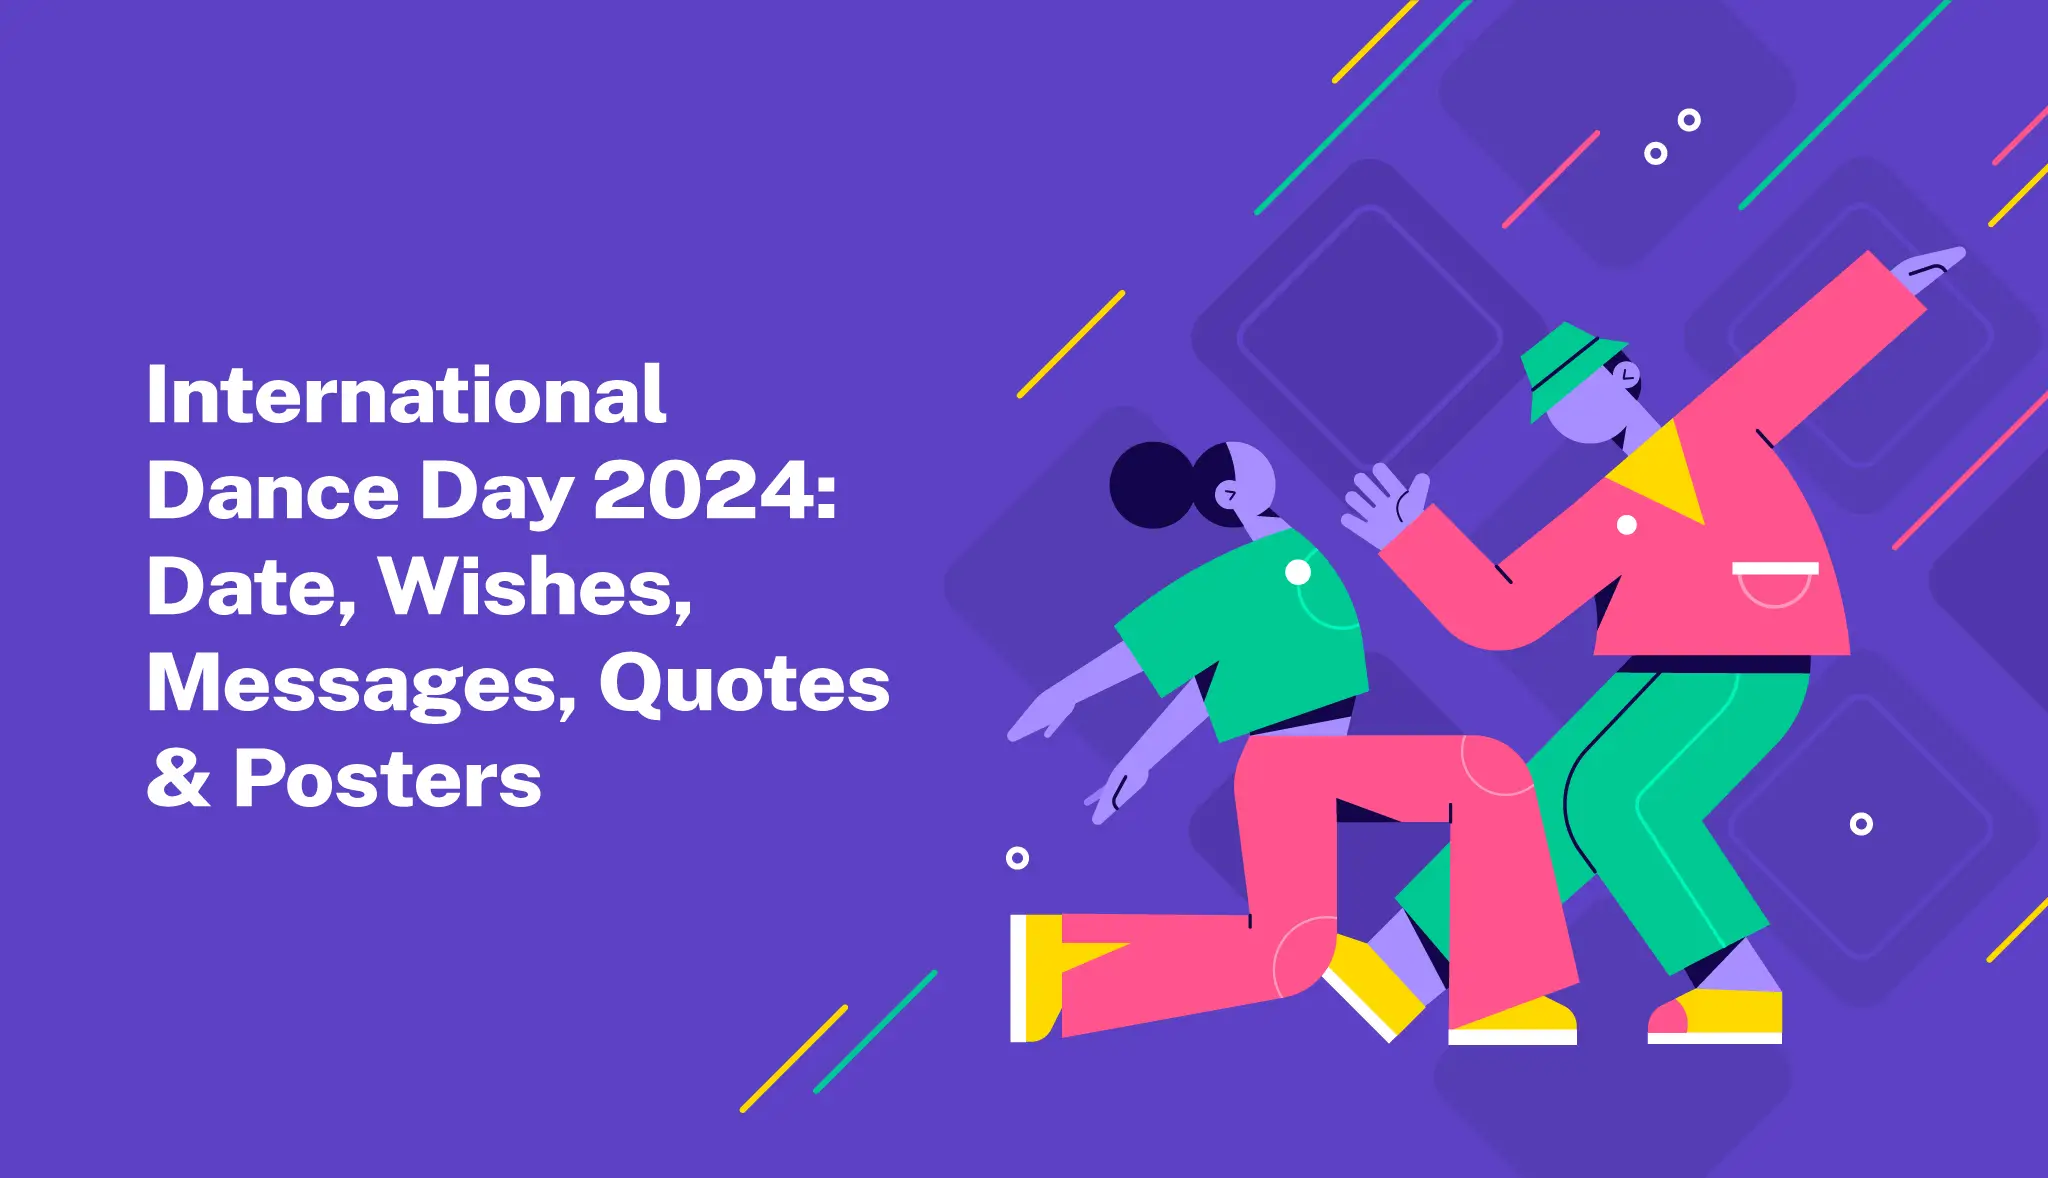 International Dance Day 2024: Date, Wishes, Messages, Quotes & Posters - Postive